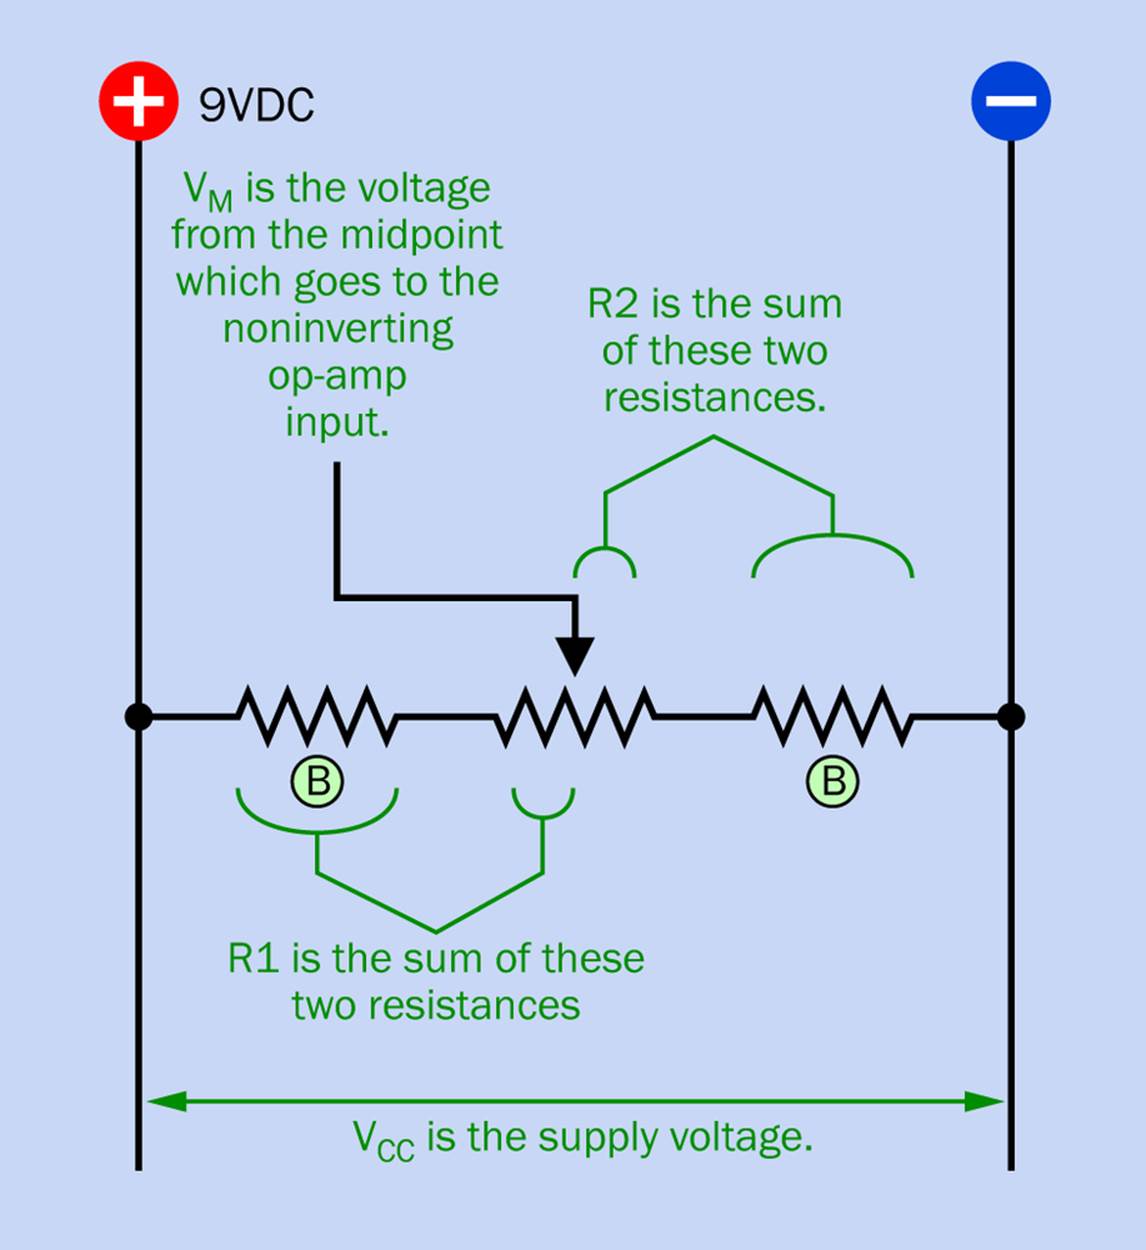 The voltage to the noninverting input of the op-amp can be calculated if you know the values shown above.